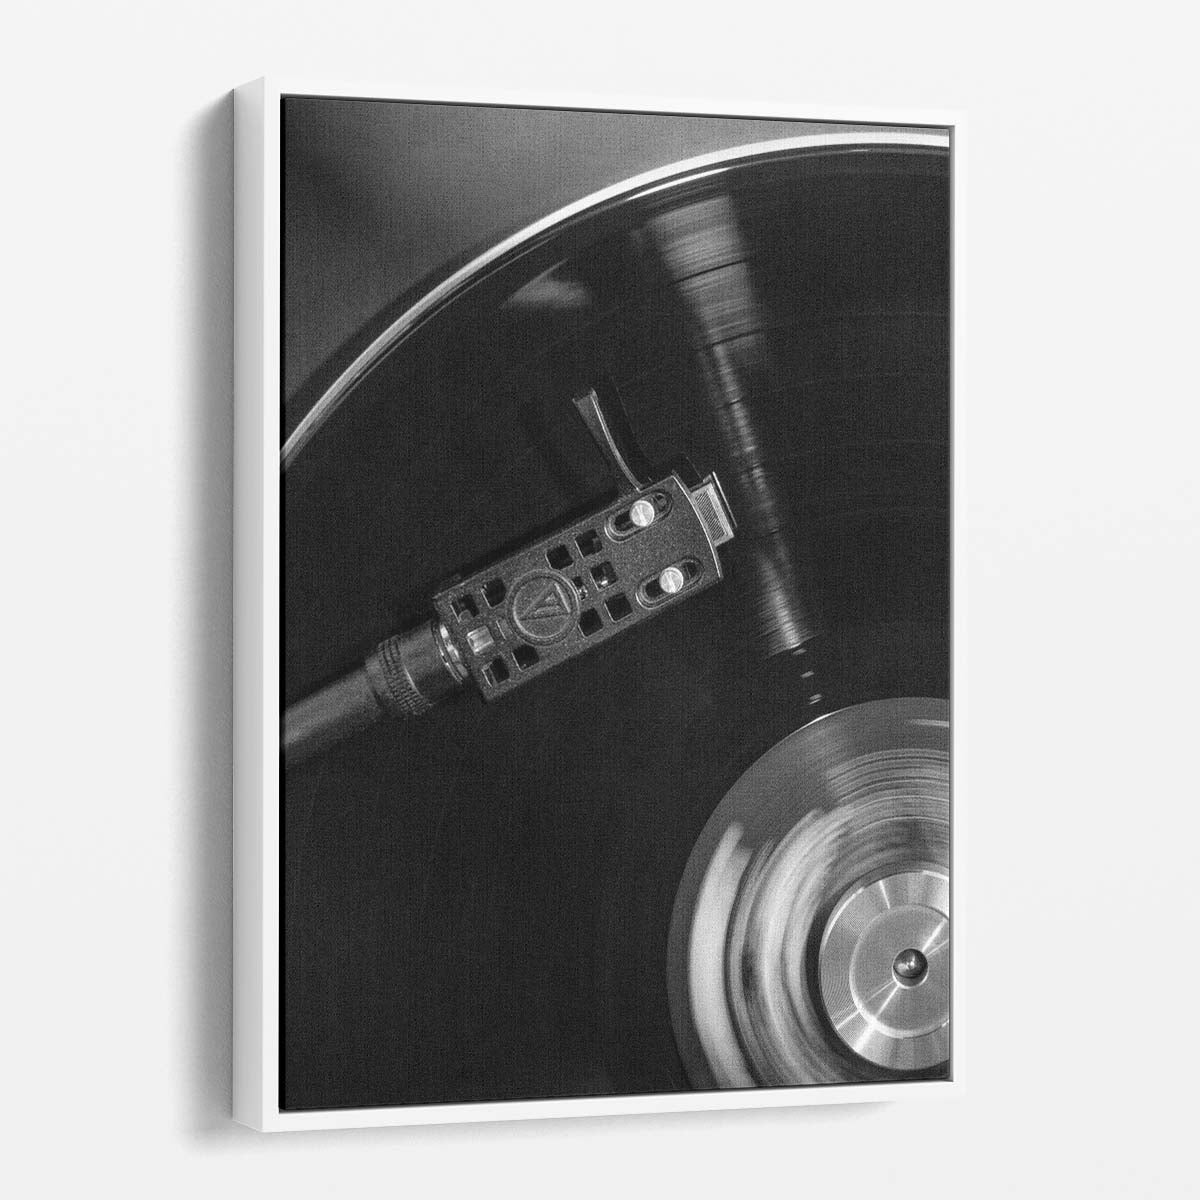 Vintage DJ Vinyl Record Player Photography in Monochrome by Luxuriance Designs, made in USA